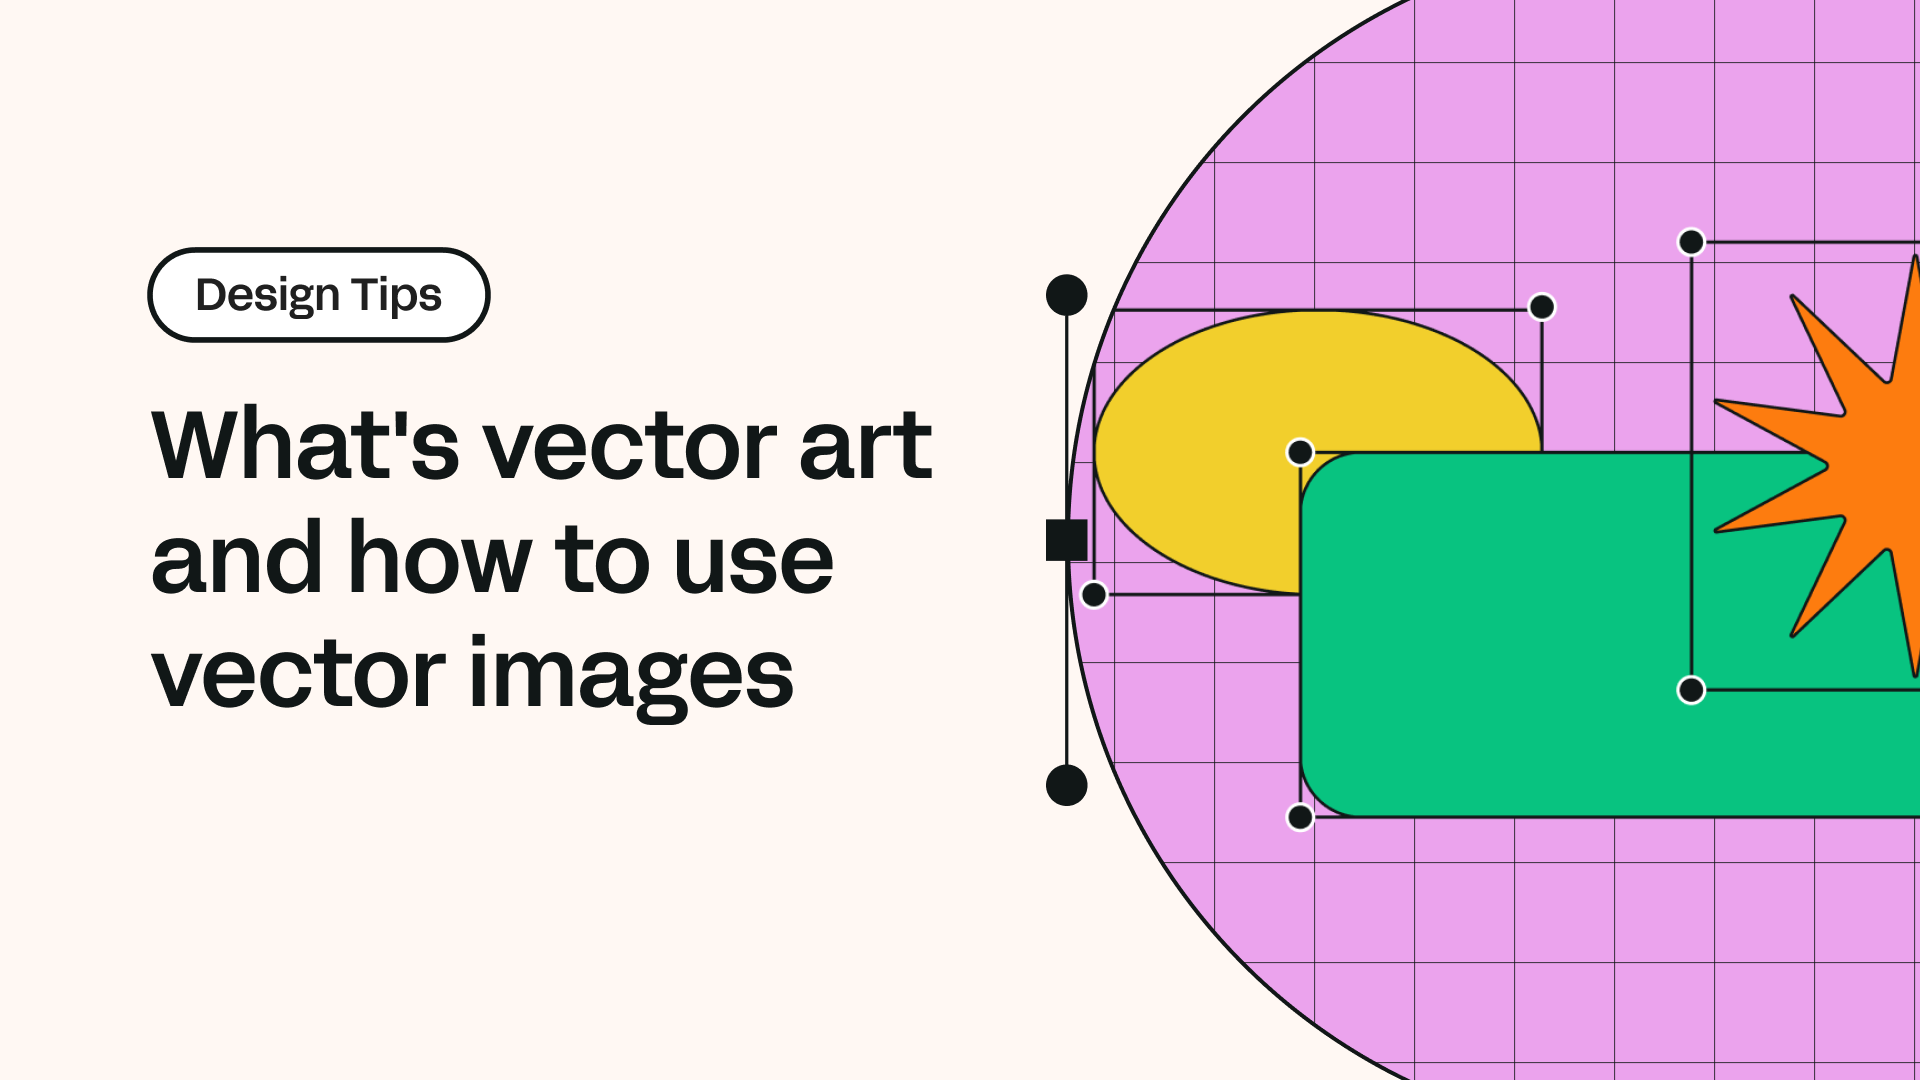 What's vector art and how to use vector images | Linearity